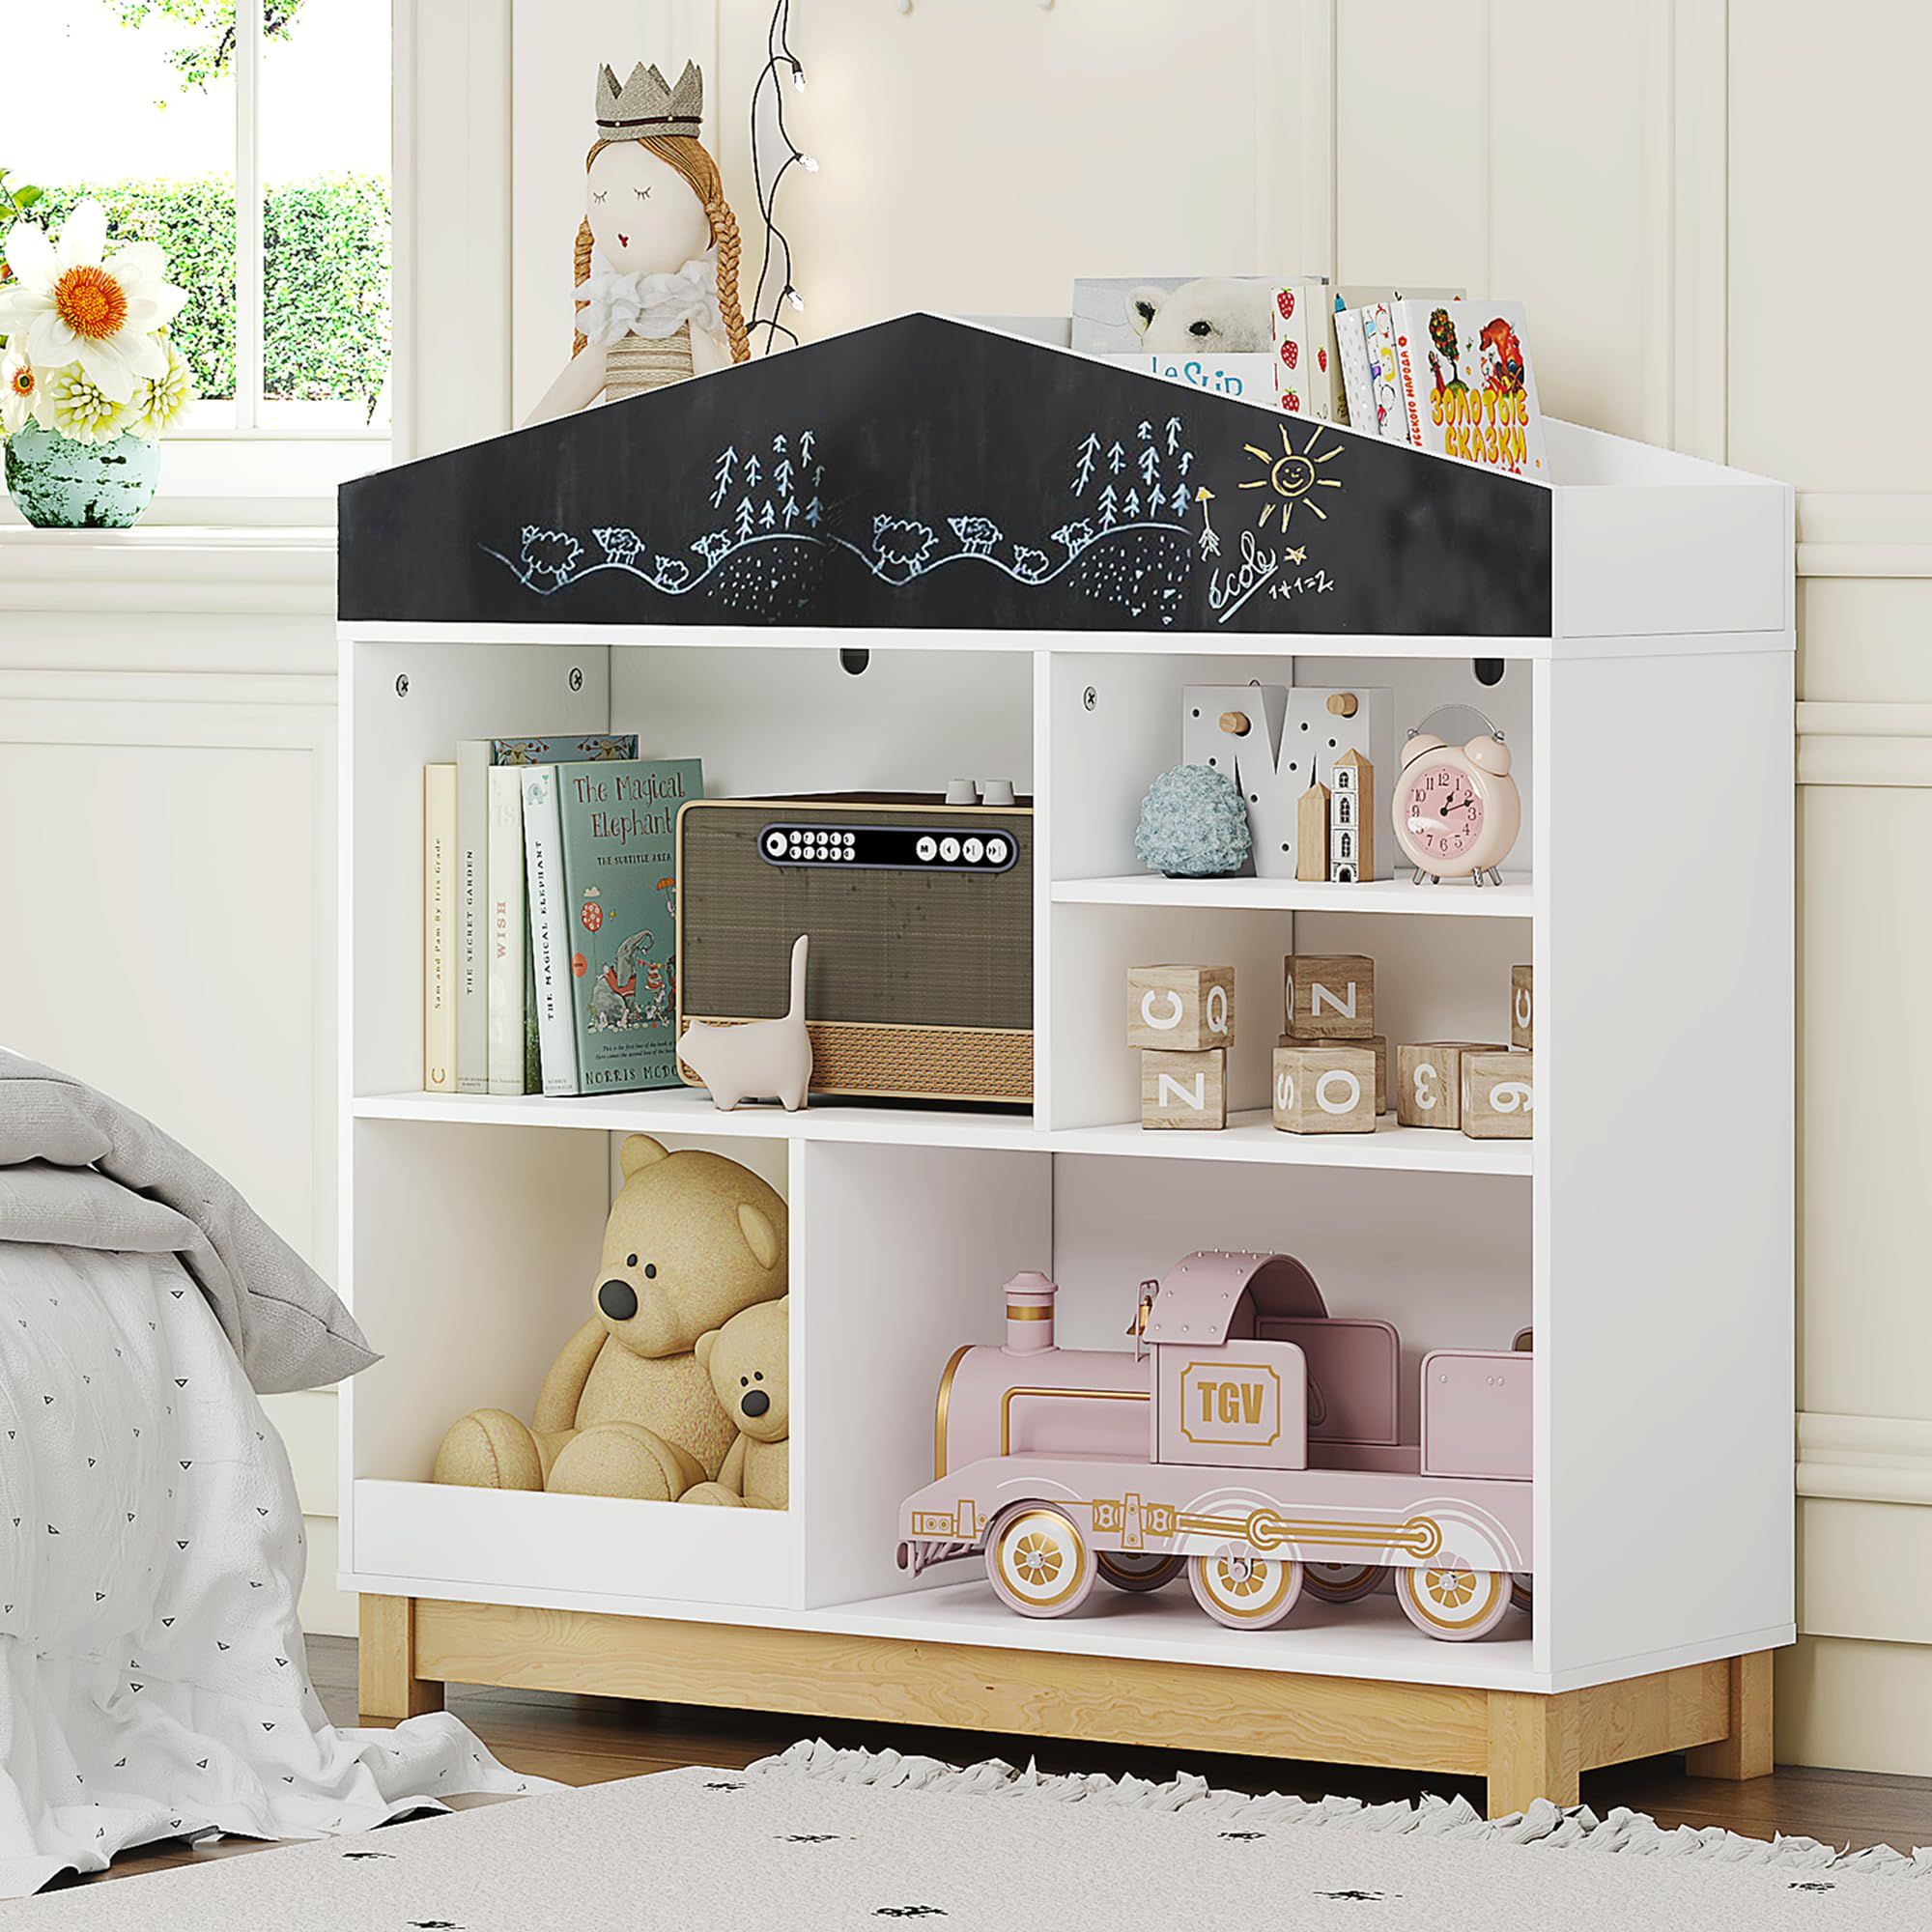 Organize Your Child’s Book Collection with a Stylish Bookcase Featuring Built-In Storage